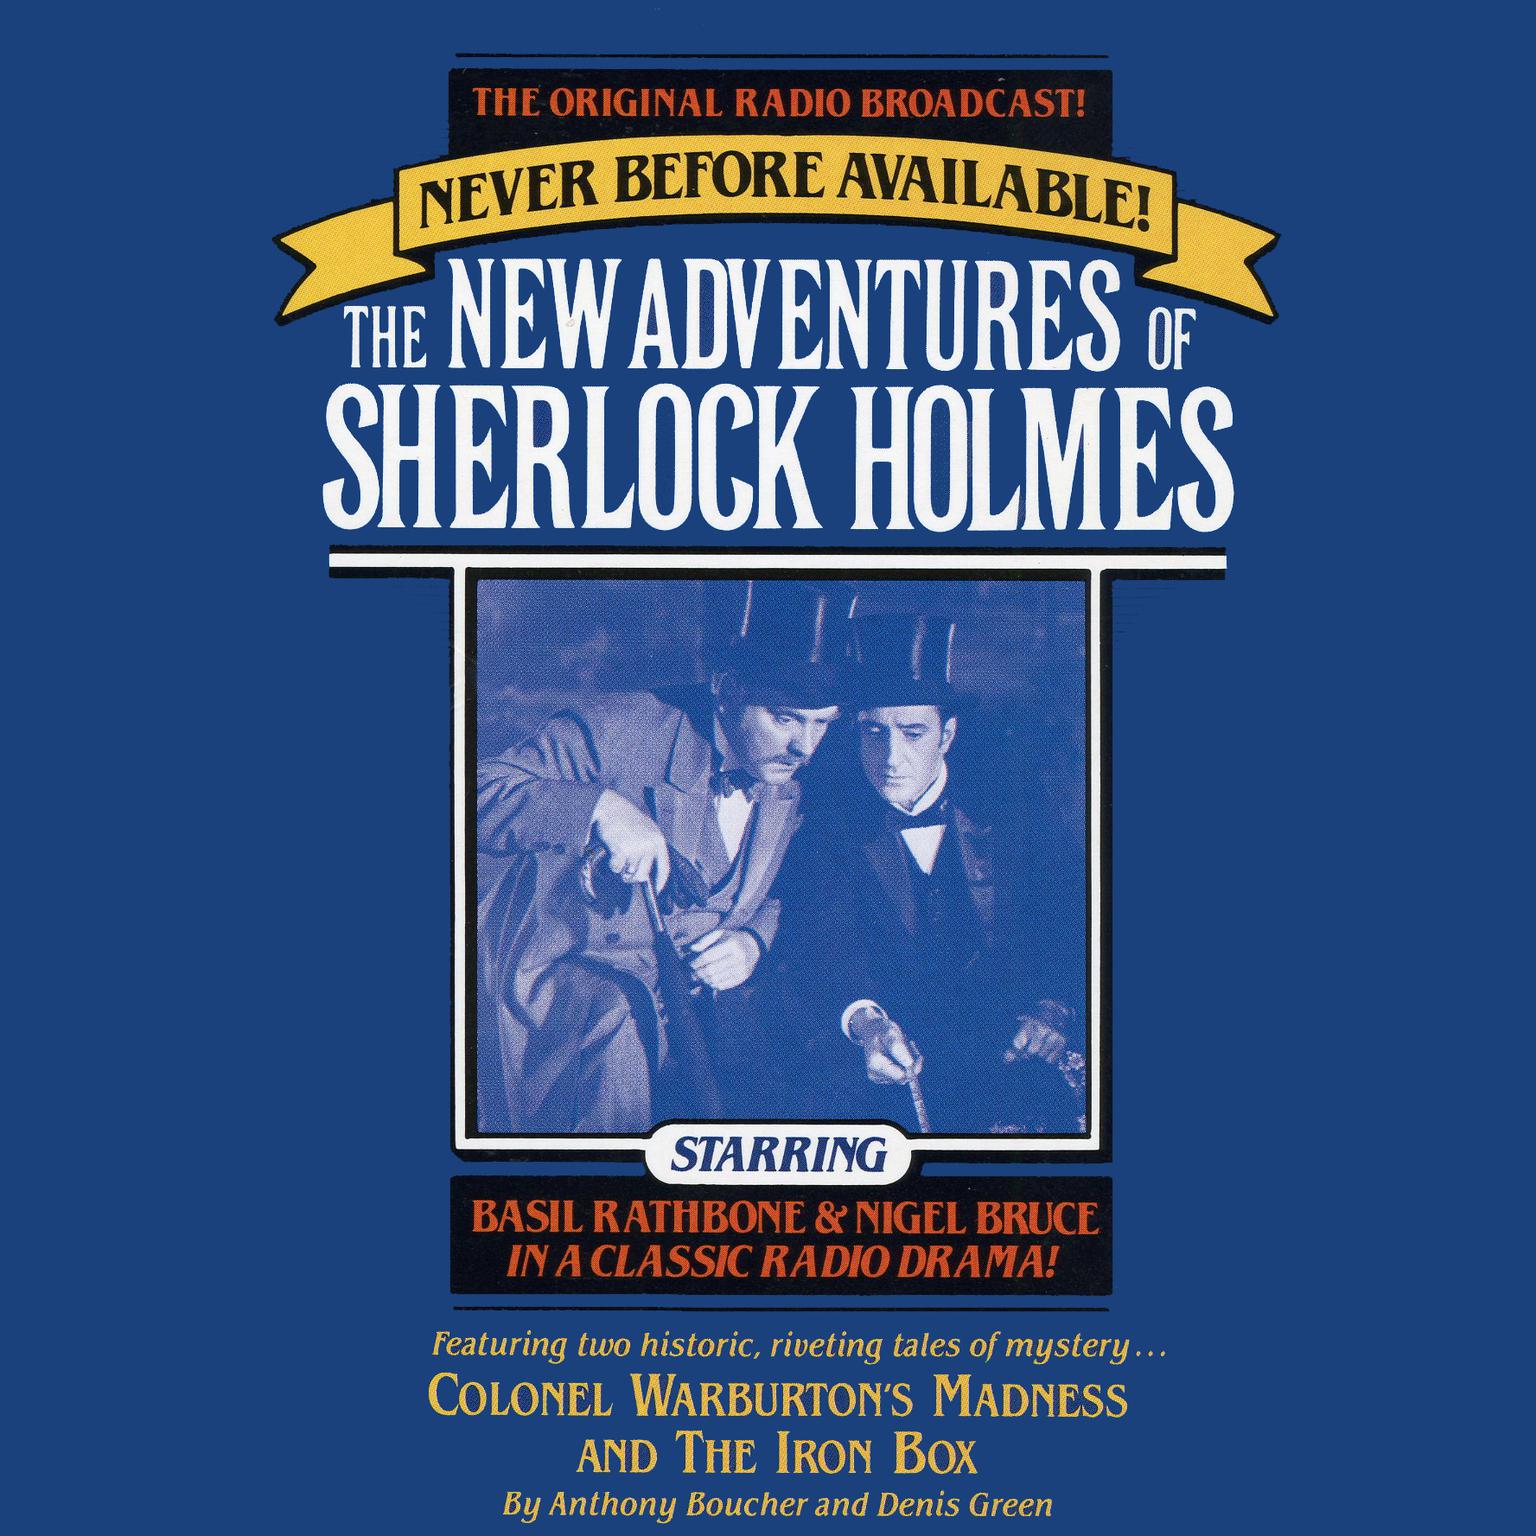 Colonel Warburton’s Madness and The Iron Box (Abridged): The New Adventures of Sherlock Holmes, Episode 8 Audiobook, by Anthony Boucher